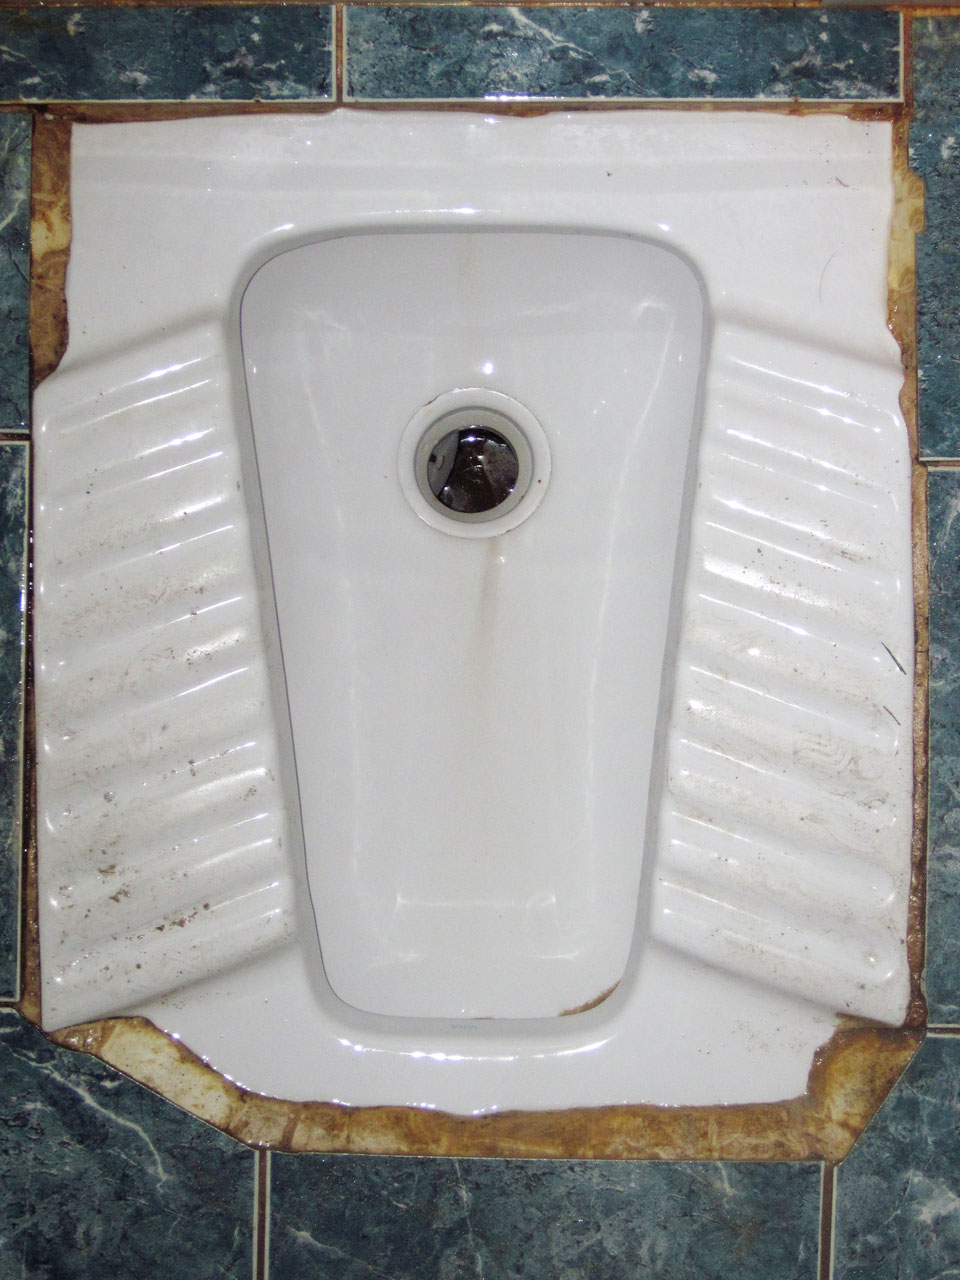 A squat toilet (also known as an Eastern, Turkish, Iranian or Natural-Position toilet). This one is in Turkey